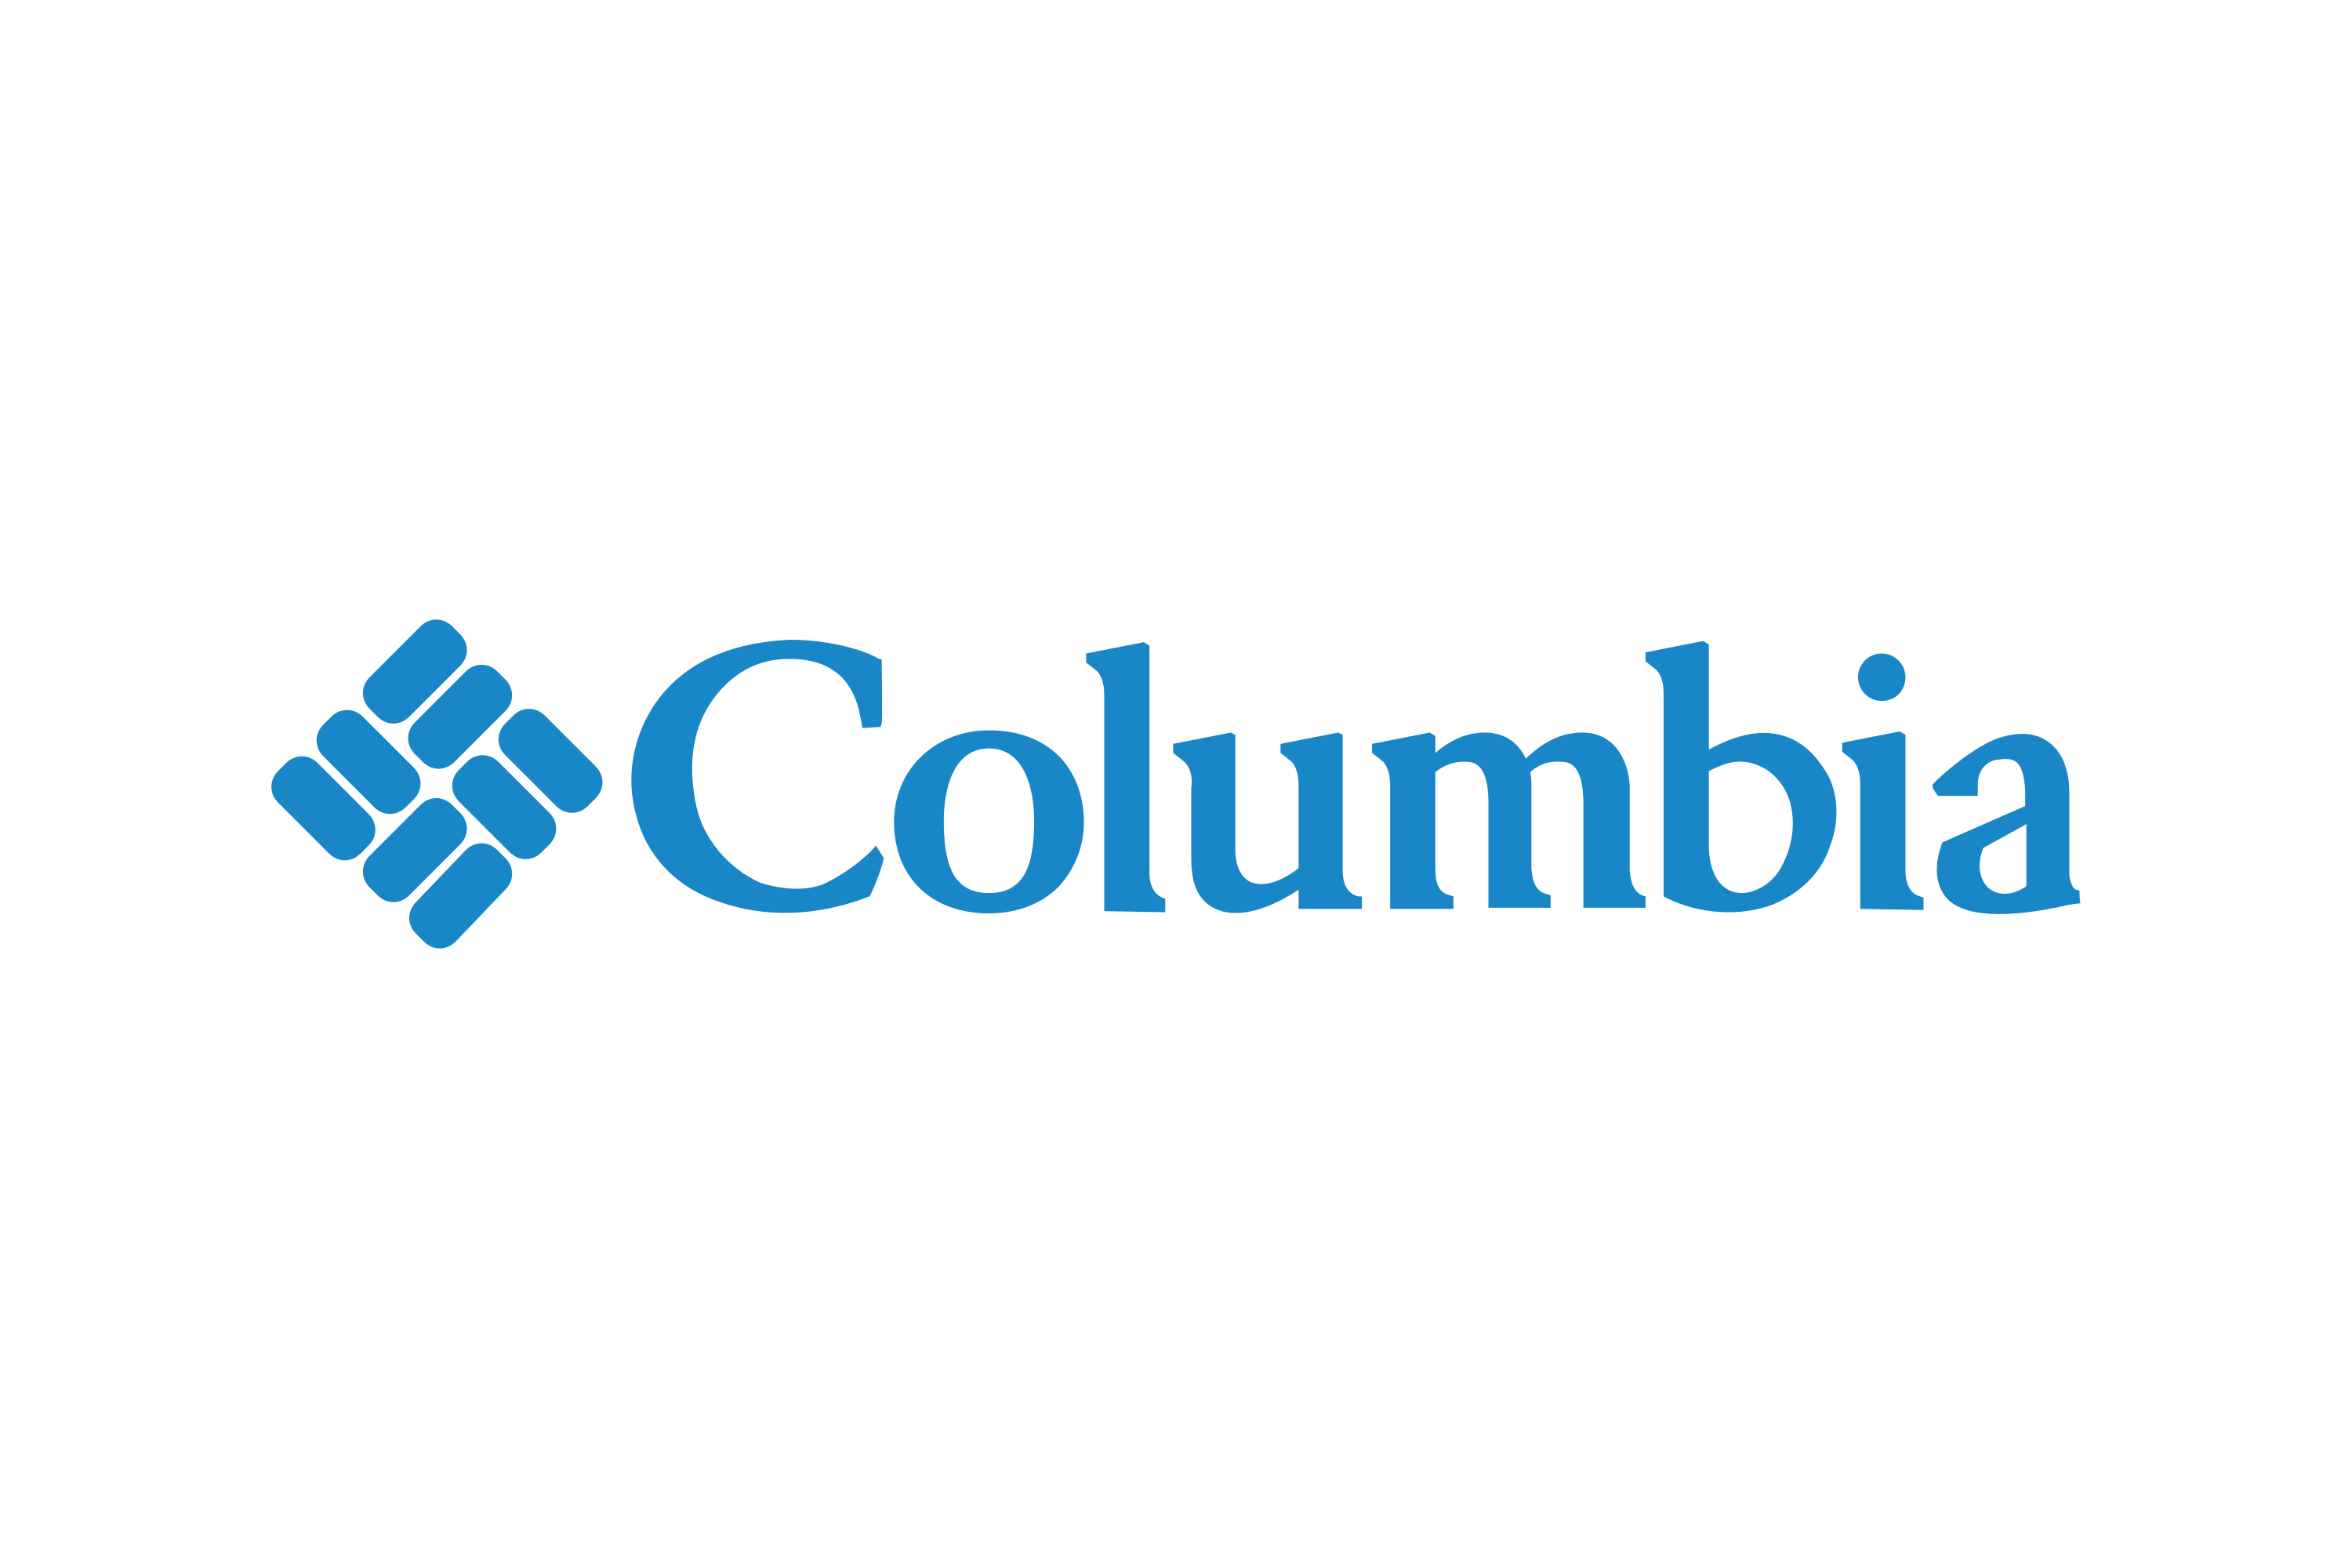 Download Columbia Sportswear Company Logo In Svg Vector Or Png